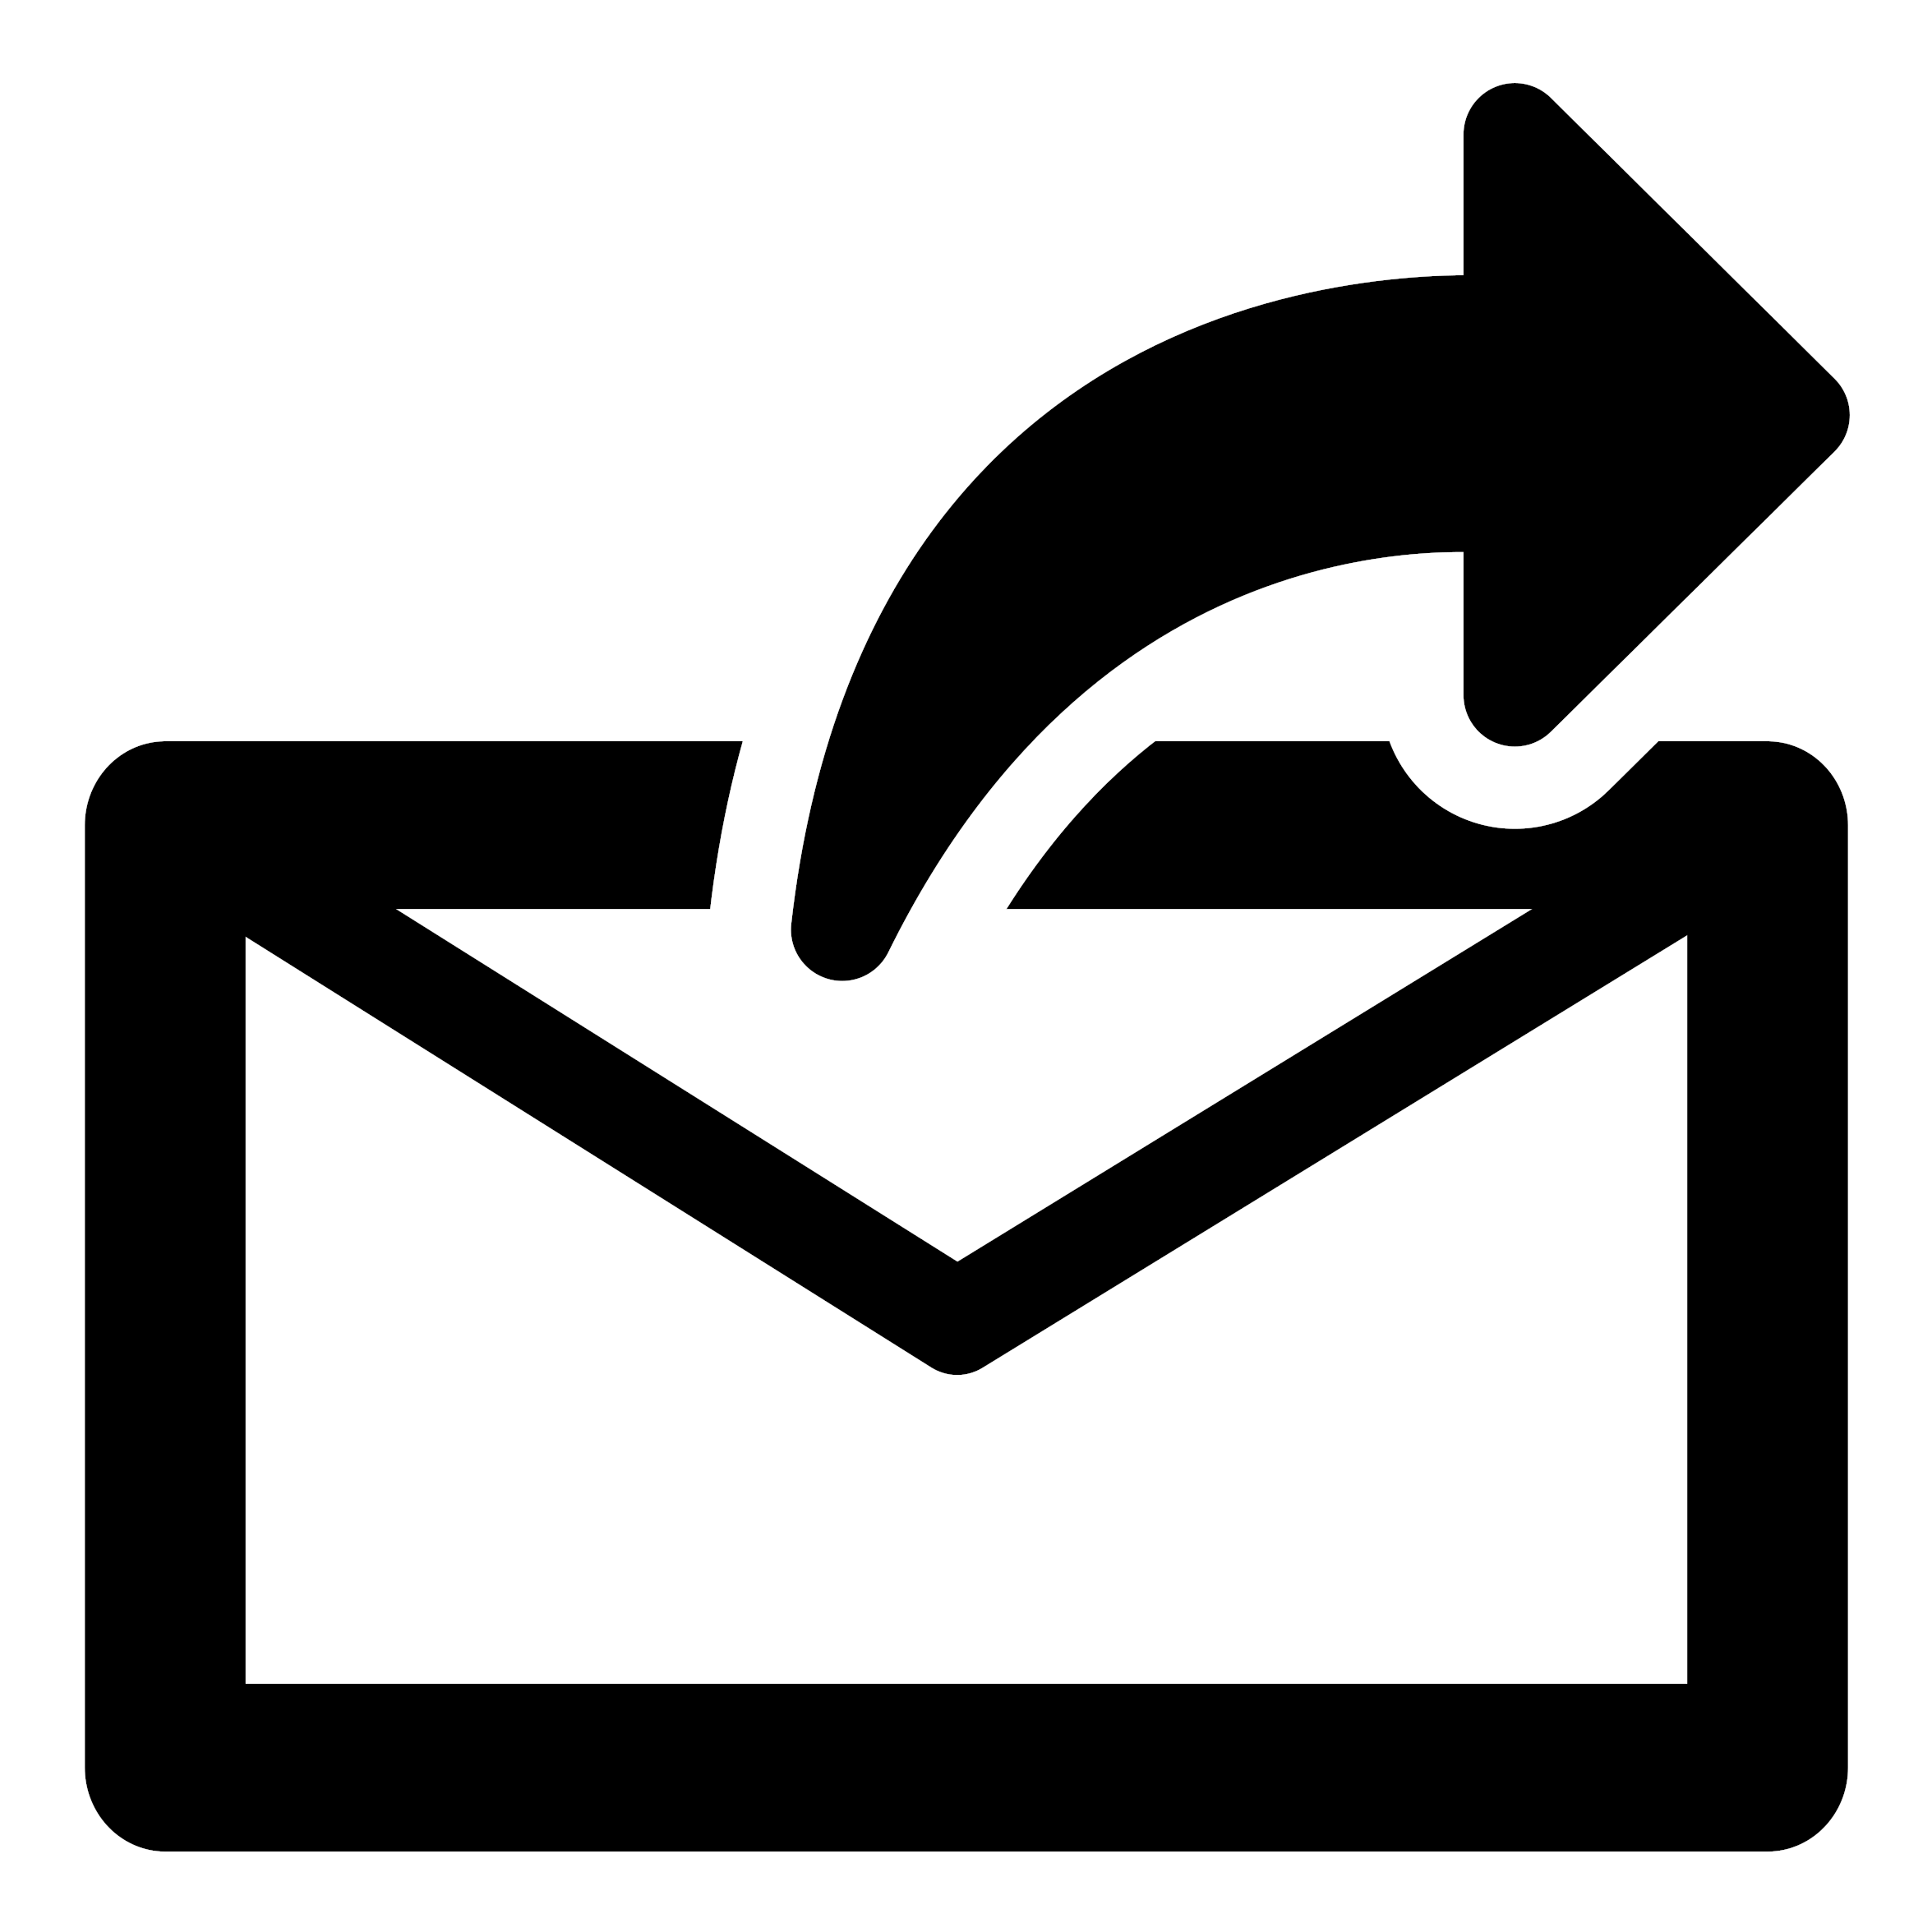 A Black And White Symbol Of An Envelope